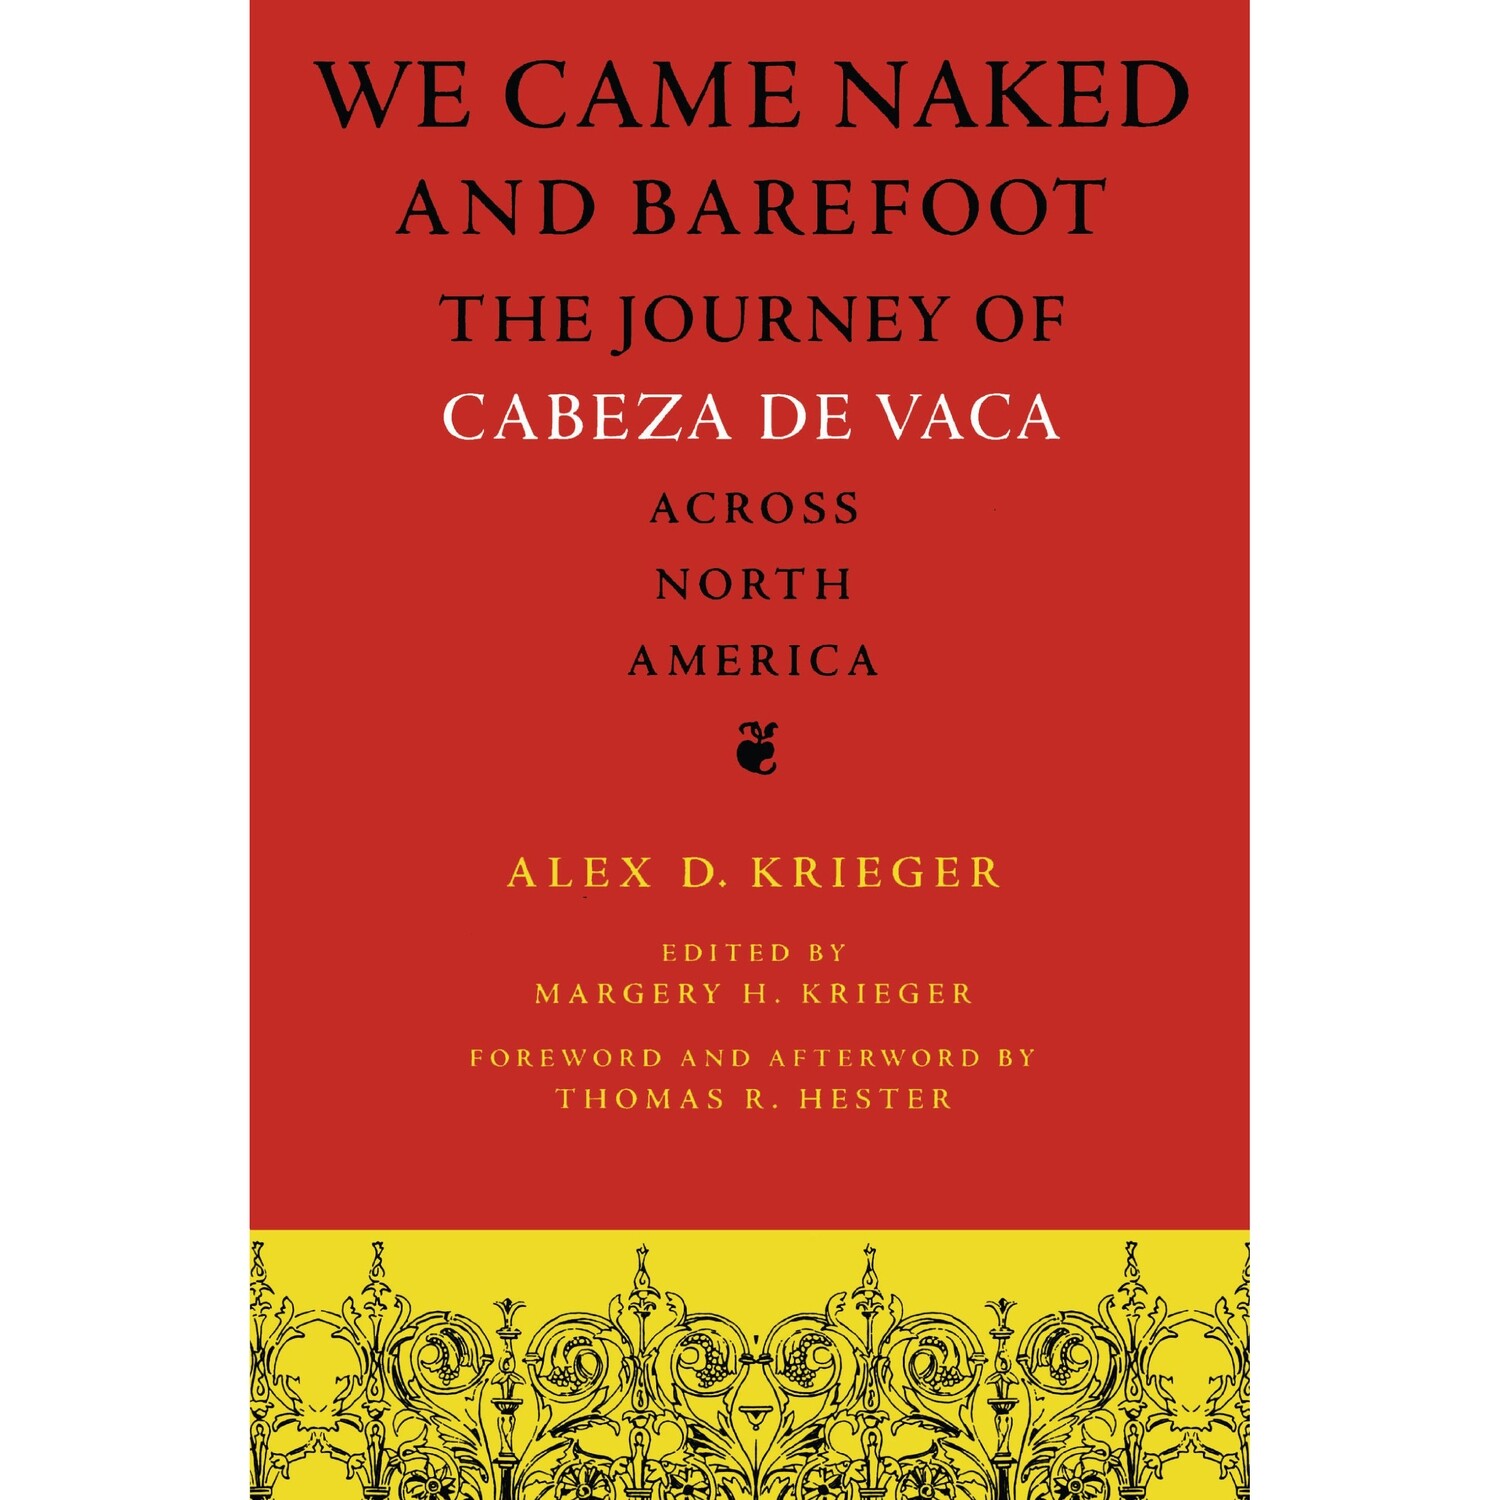 "We Came Naked and Barefoot: The Journey of Cabeza de Vaca across North America" by Alex D. Krieger